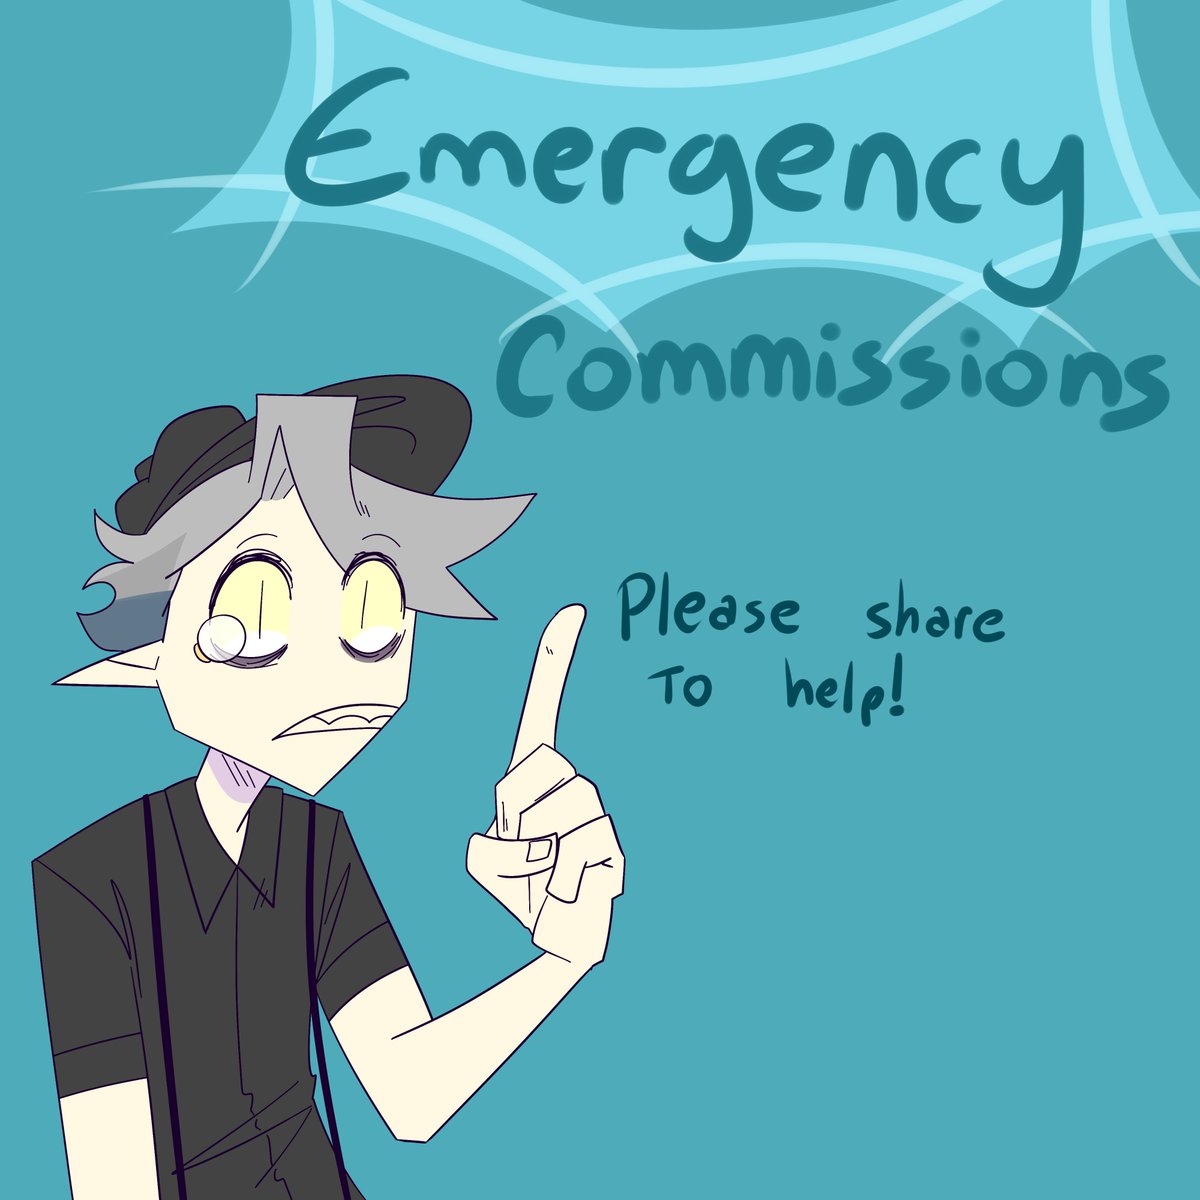 EMERGENCY COMMISSIONS Please retweet to spread Check my carrd on my bio, all the information and part of my portfolio is there! I need money to help my parents to pay the bills and my father that was sued. (I will explain what's happening below)